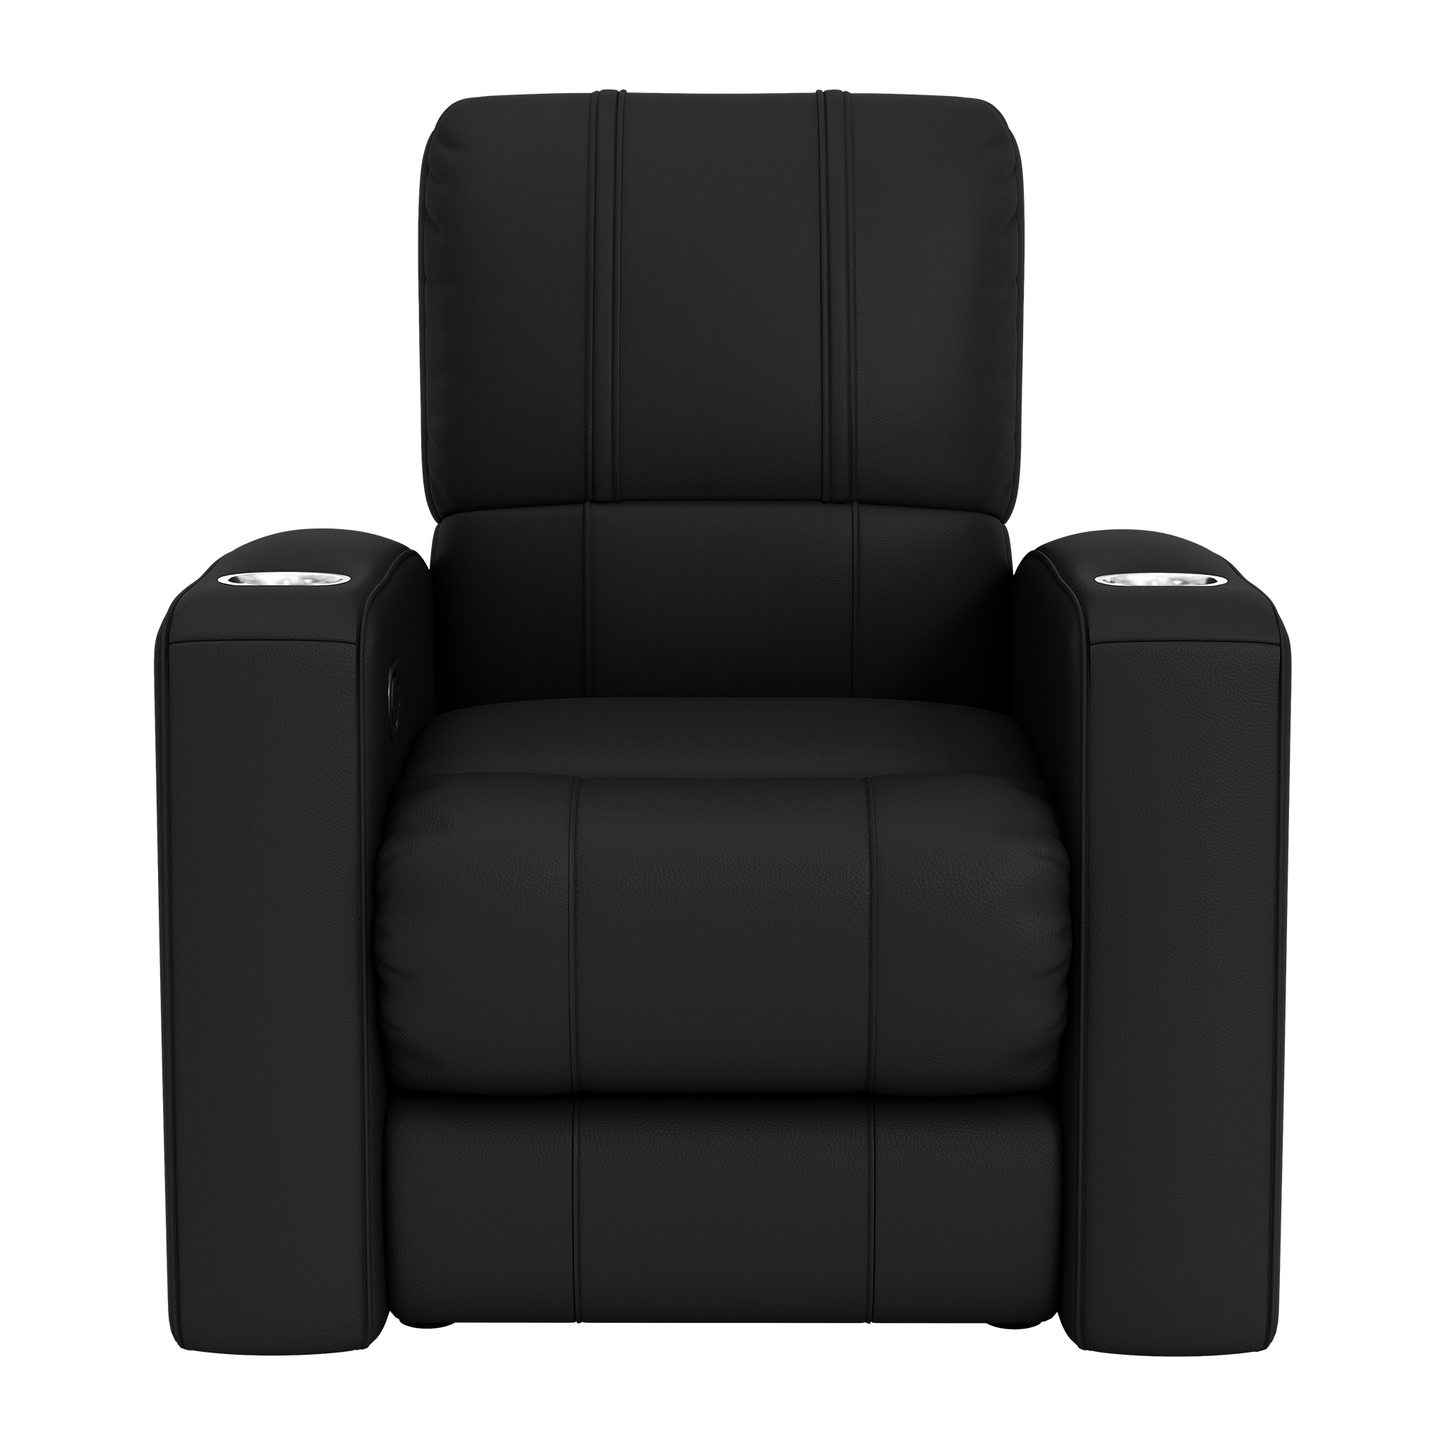 Relax Home Theater Recliner with Montana Grizzlies Logo